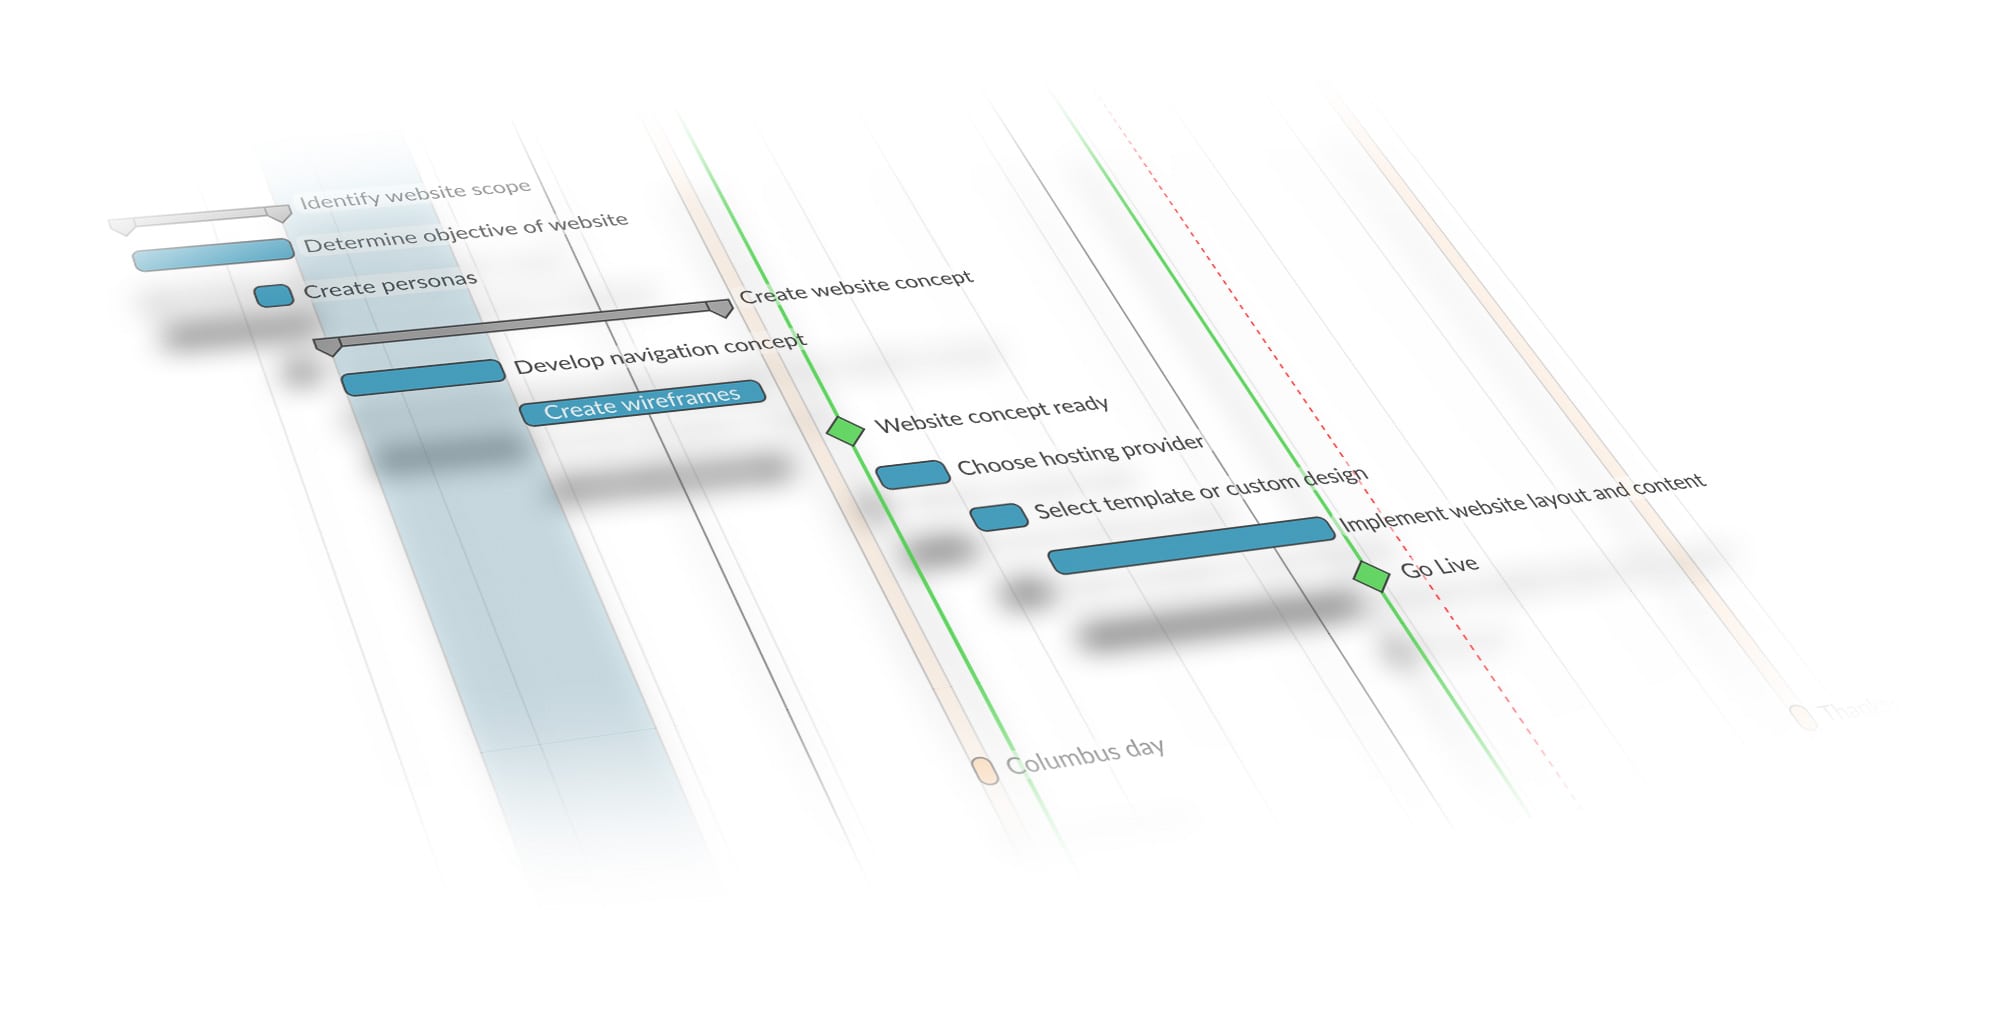 Old timeline view will be discontinued: Please migrate your timeline in OpenProject 7.0